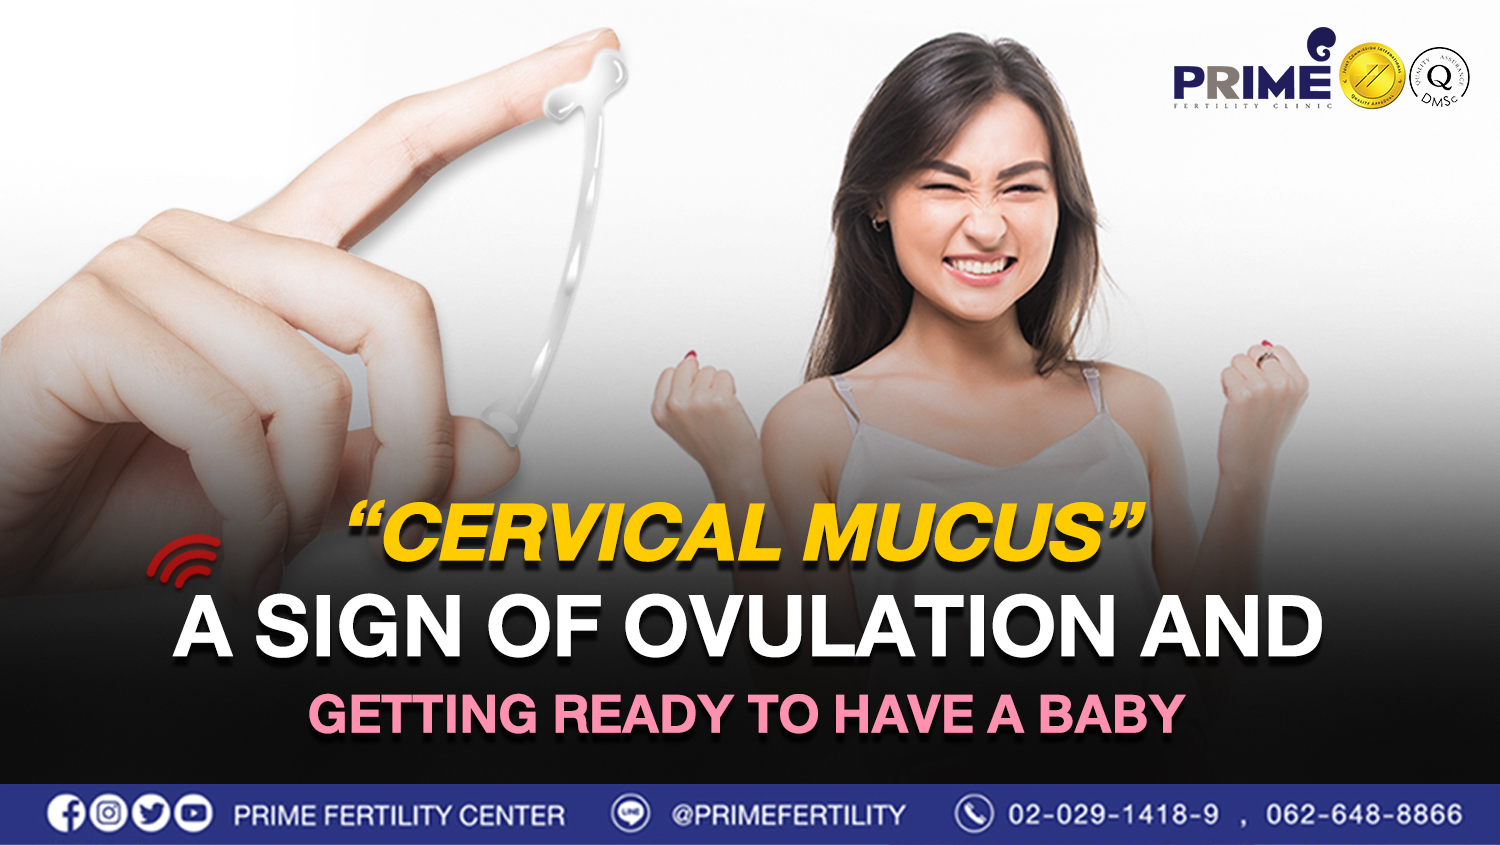 “Cervical Mucus”, a sign of ovulation and getting ready to have a baby